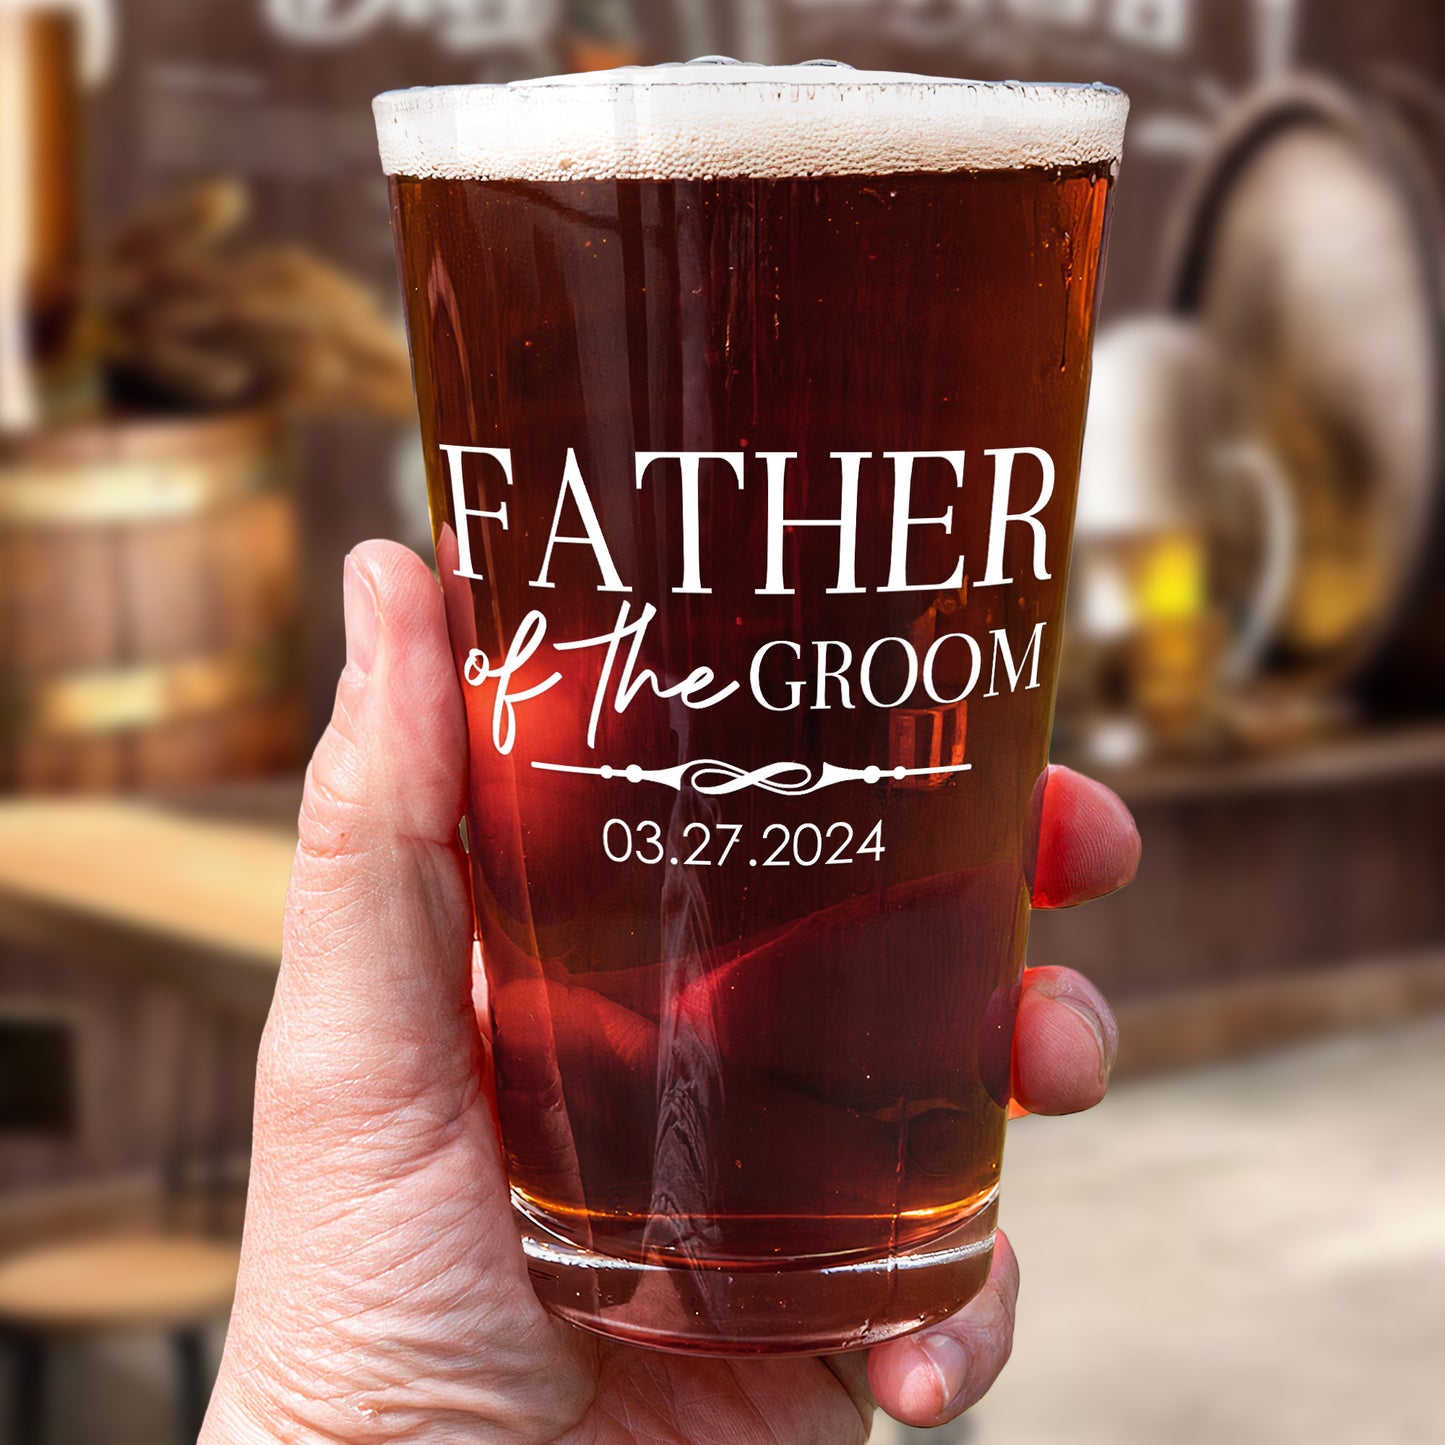 Father Of The Groom Thank You For Raising A Man Of My Dreams - Personalized Beer Glass